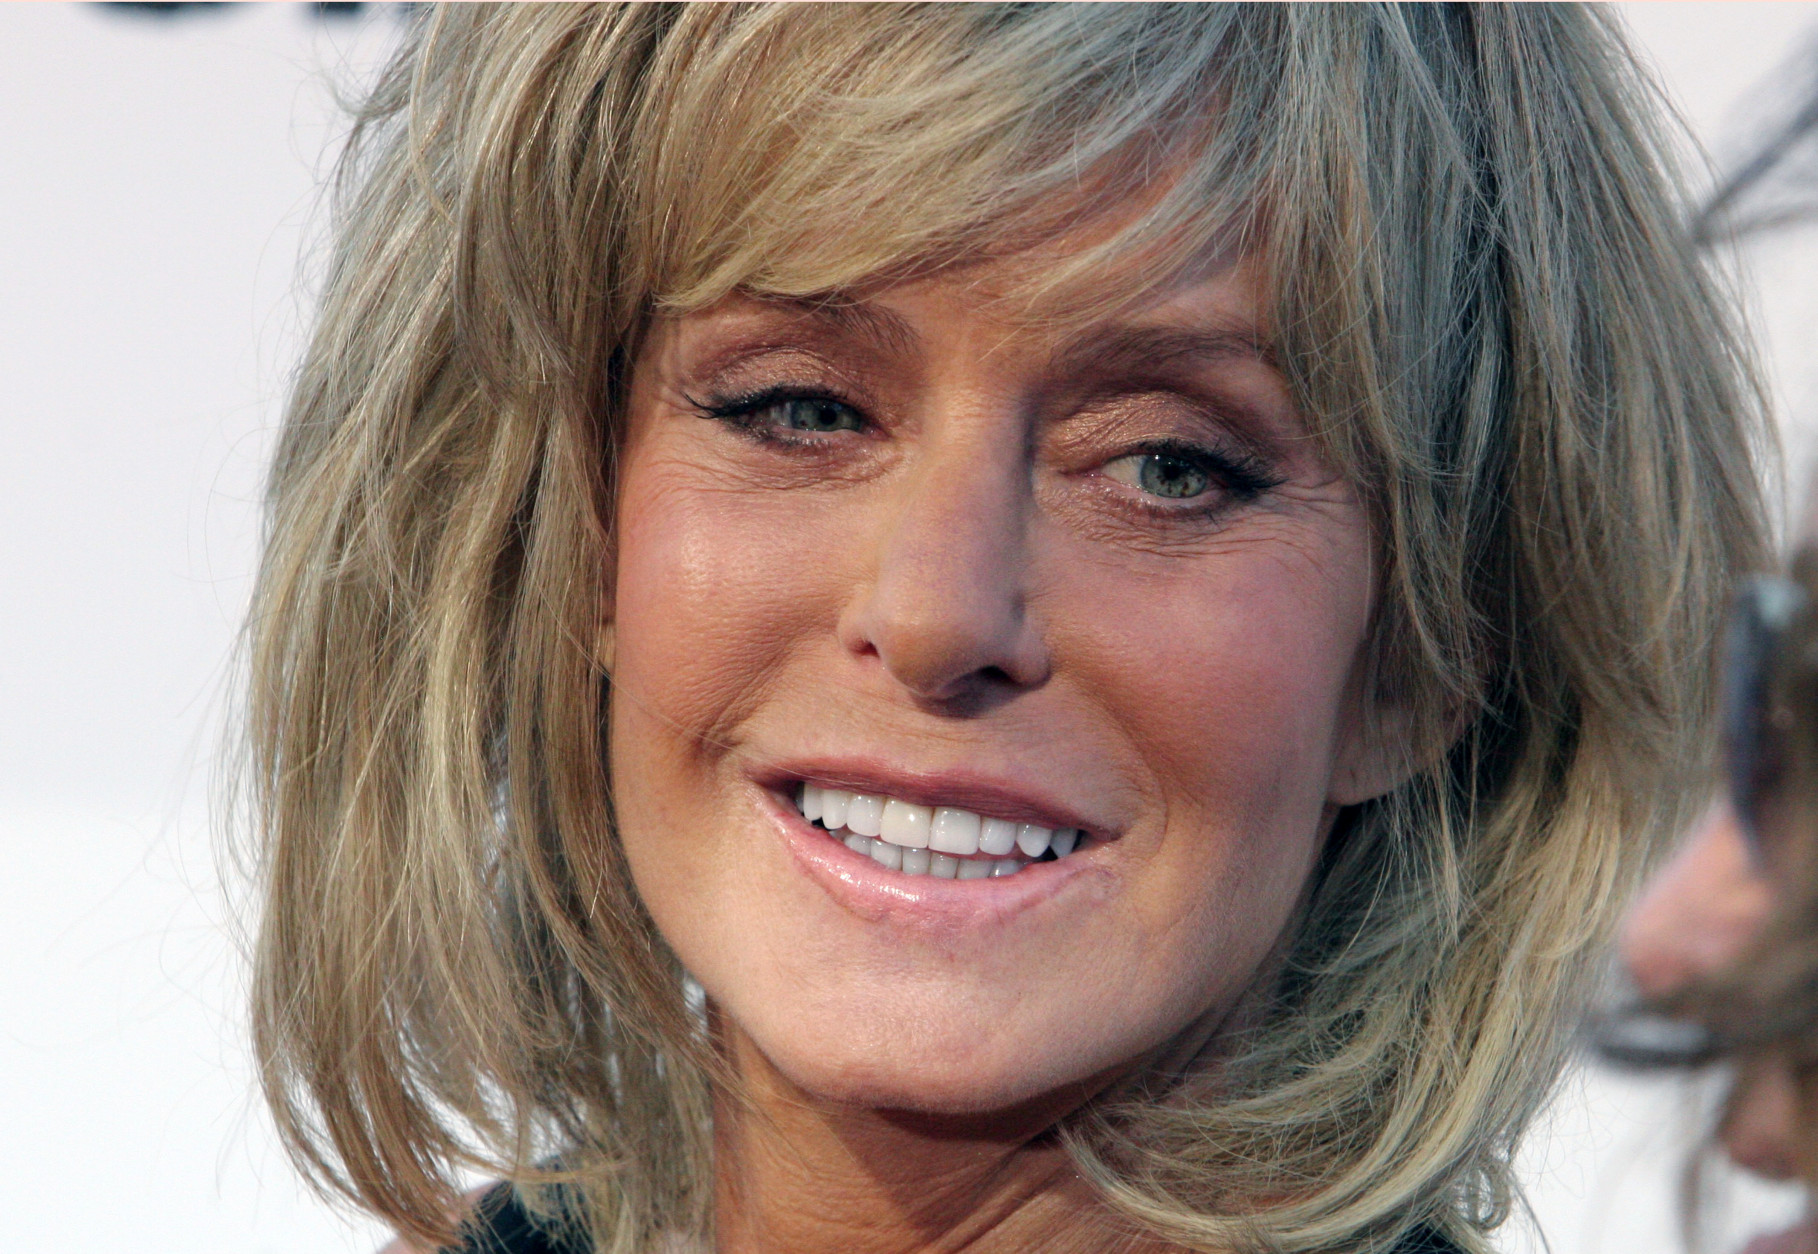 FILE - In this Aug. 13, 2006 file photo, actress Farrah Fawcett poses for photographers on the red carpet before Comedy Central's "Roast of William Shatner,"  in Los Angeles. Fawcett died, Thursday, June 25, 2009, at a hospital in Los Angeles.  She was 62. (AP Photo/Rene Macura, file)